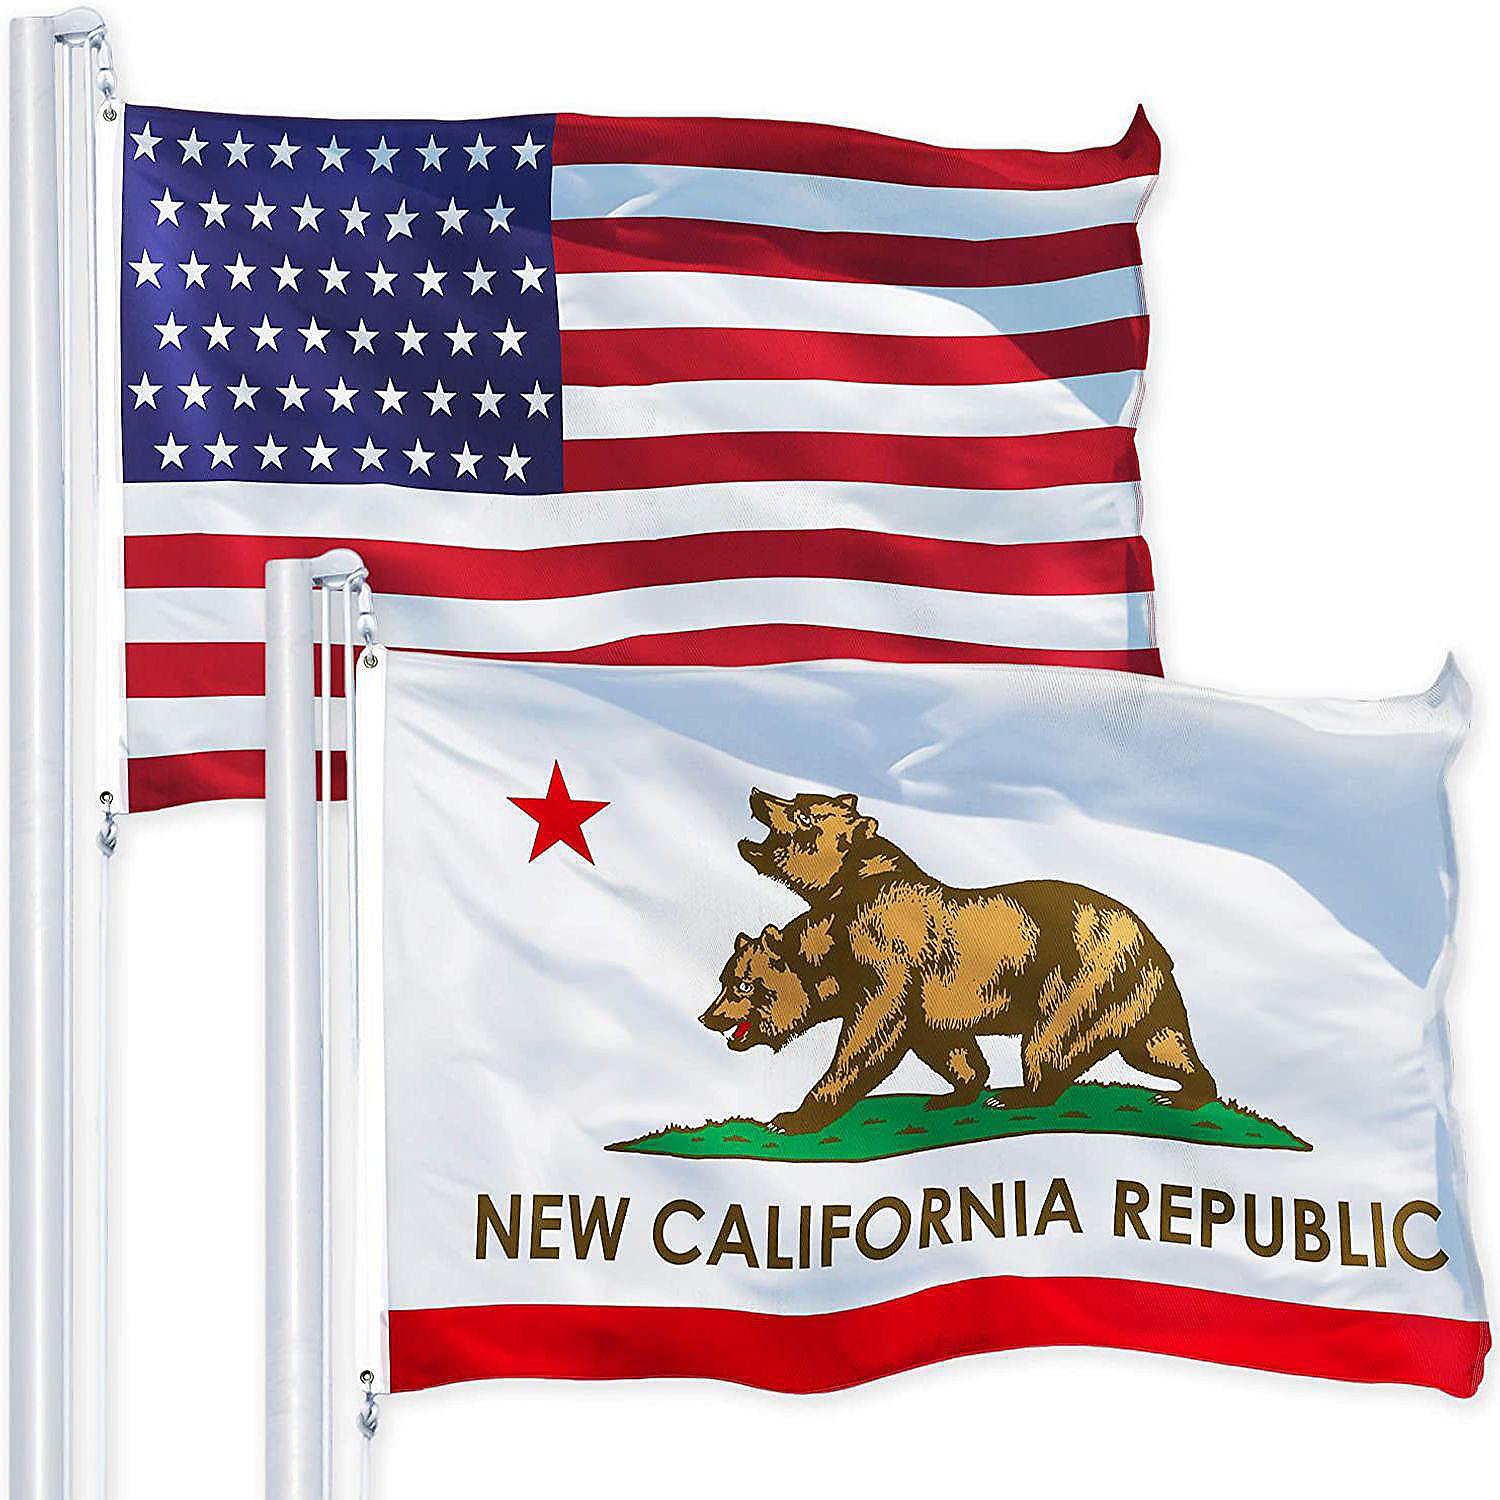 California CA State Flag 3x5 FT Printed 150D Polyester Golden State By G128 747719930166 